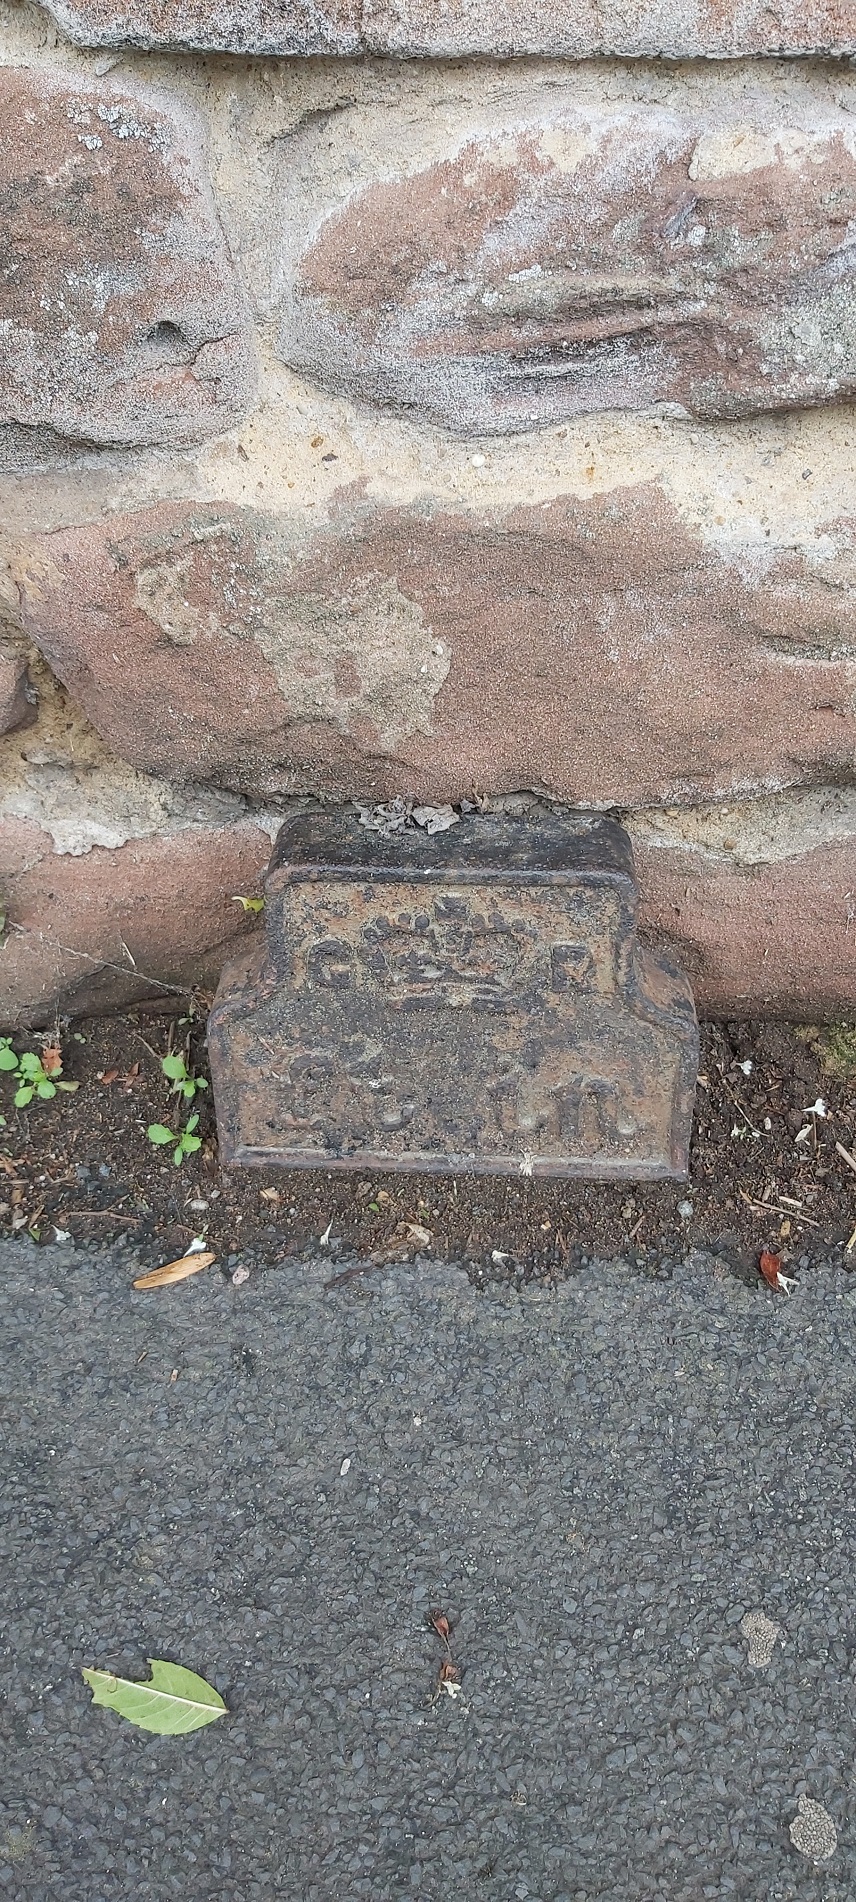 Telegraph cable marker post at 30m North of Wheatsheaf Inn, Neston Road, Little Neston, The Wirral by Mark Denyer 